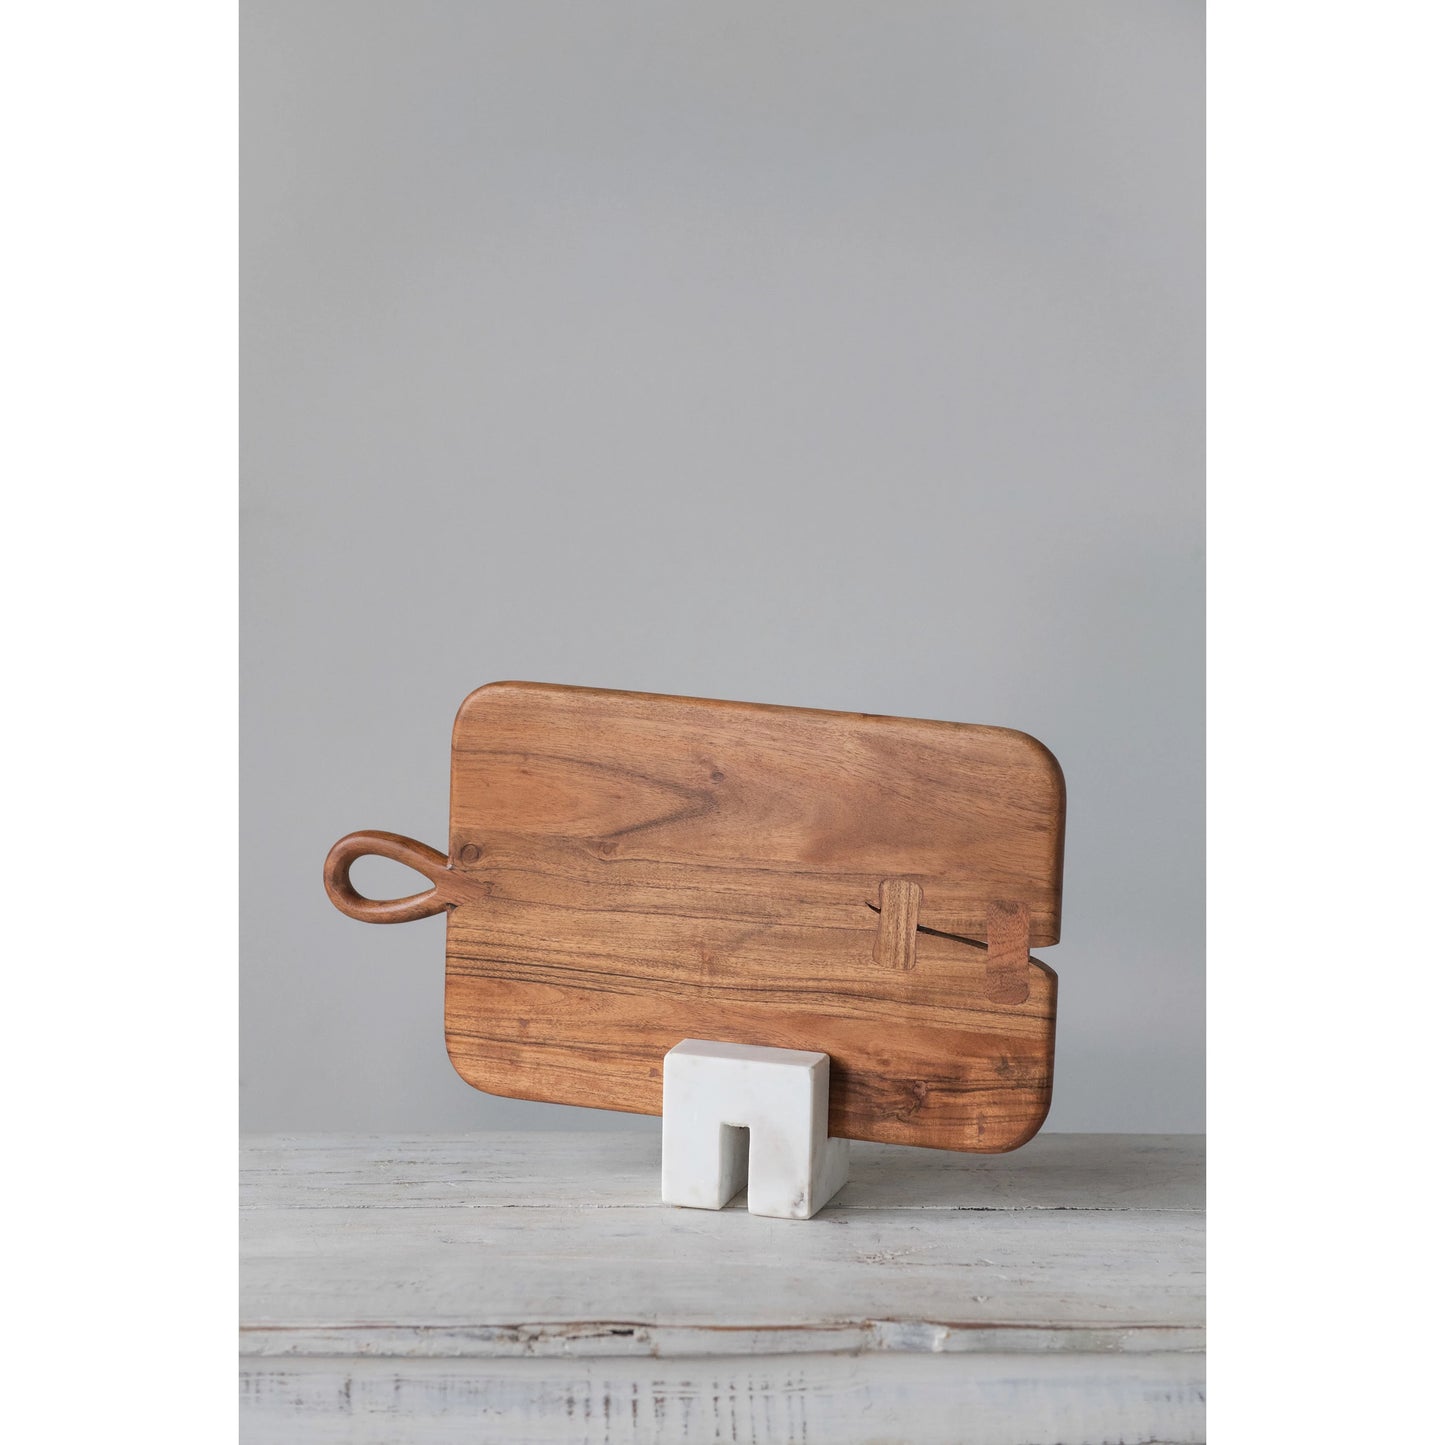 wood board with curved handle propped in a marble stand.